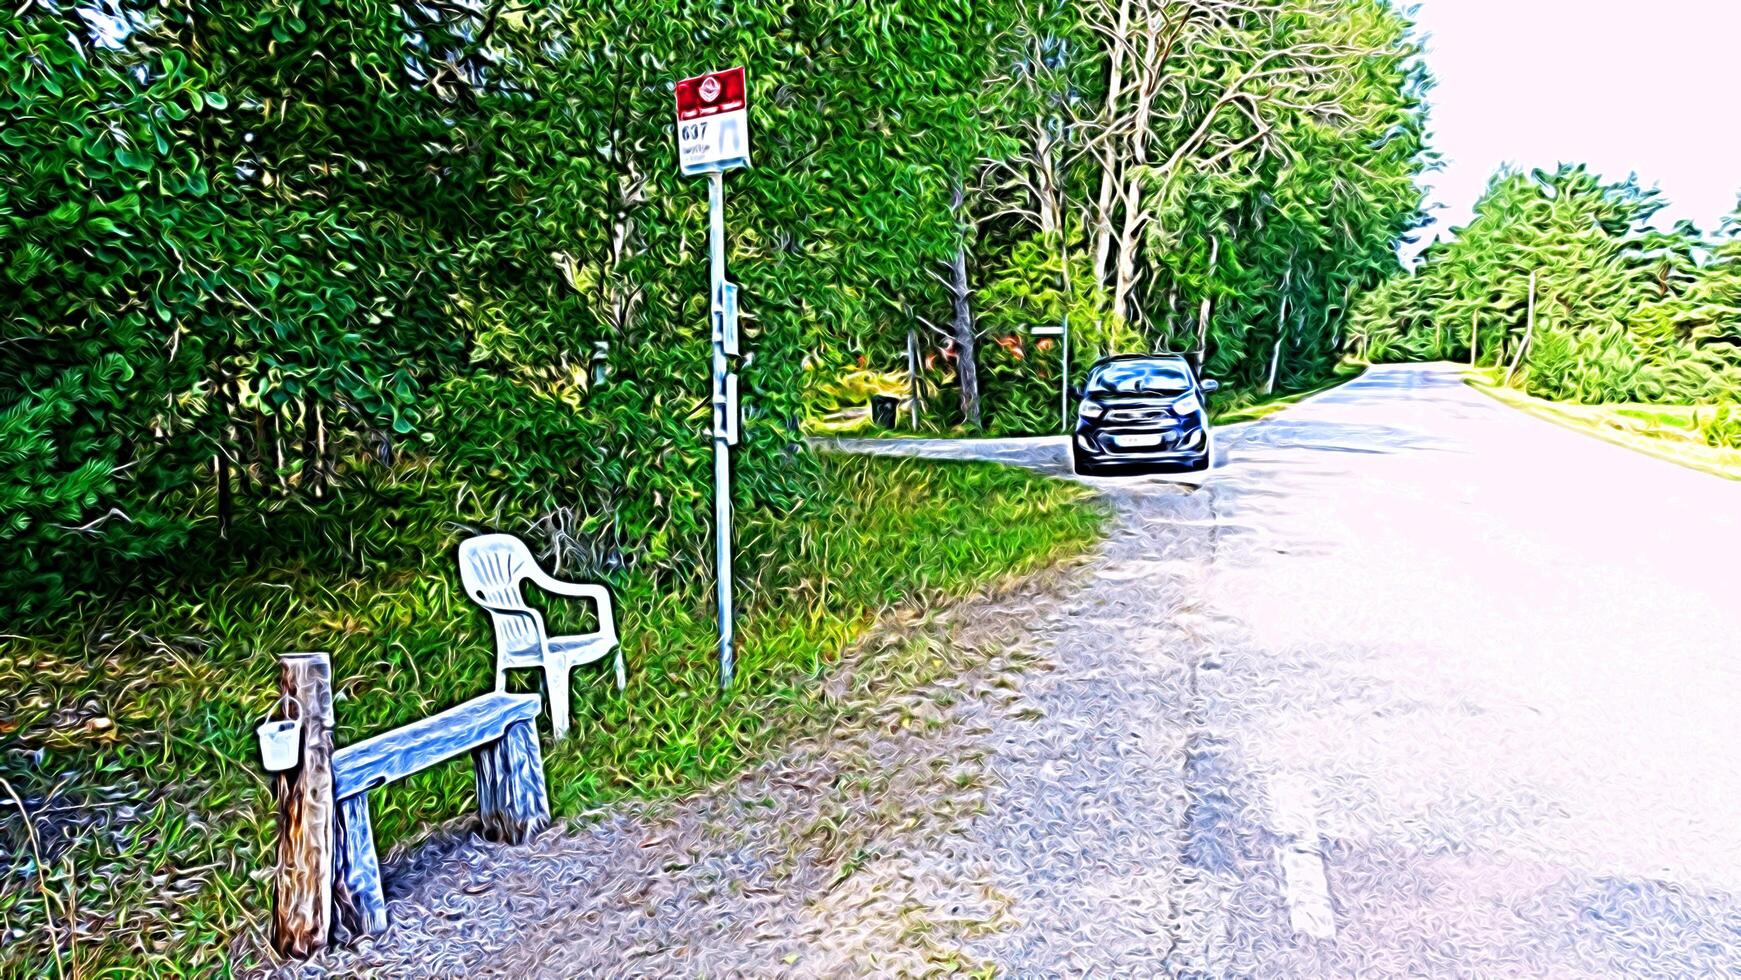 Digital painting style representing a bus stop in the countryside in Scandinavia photo